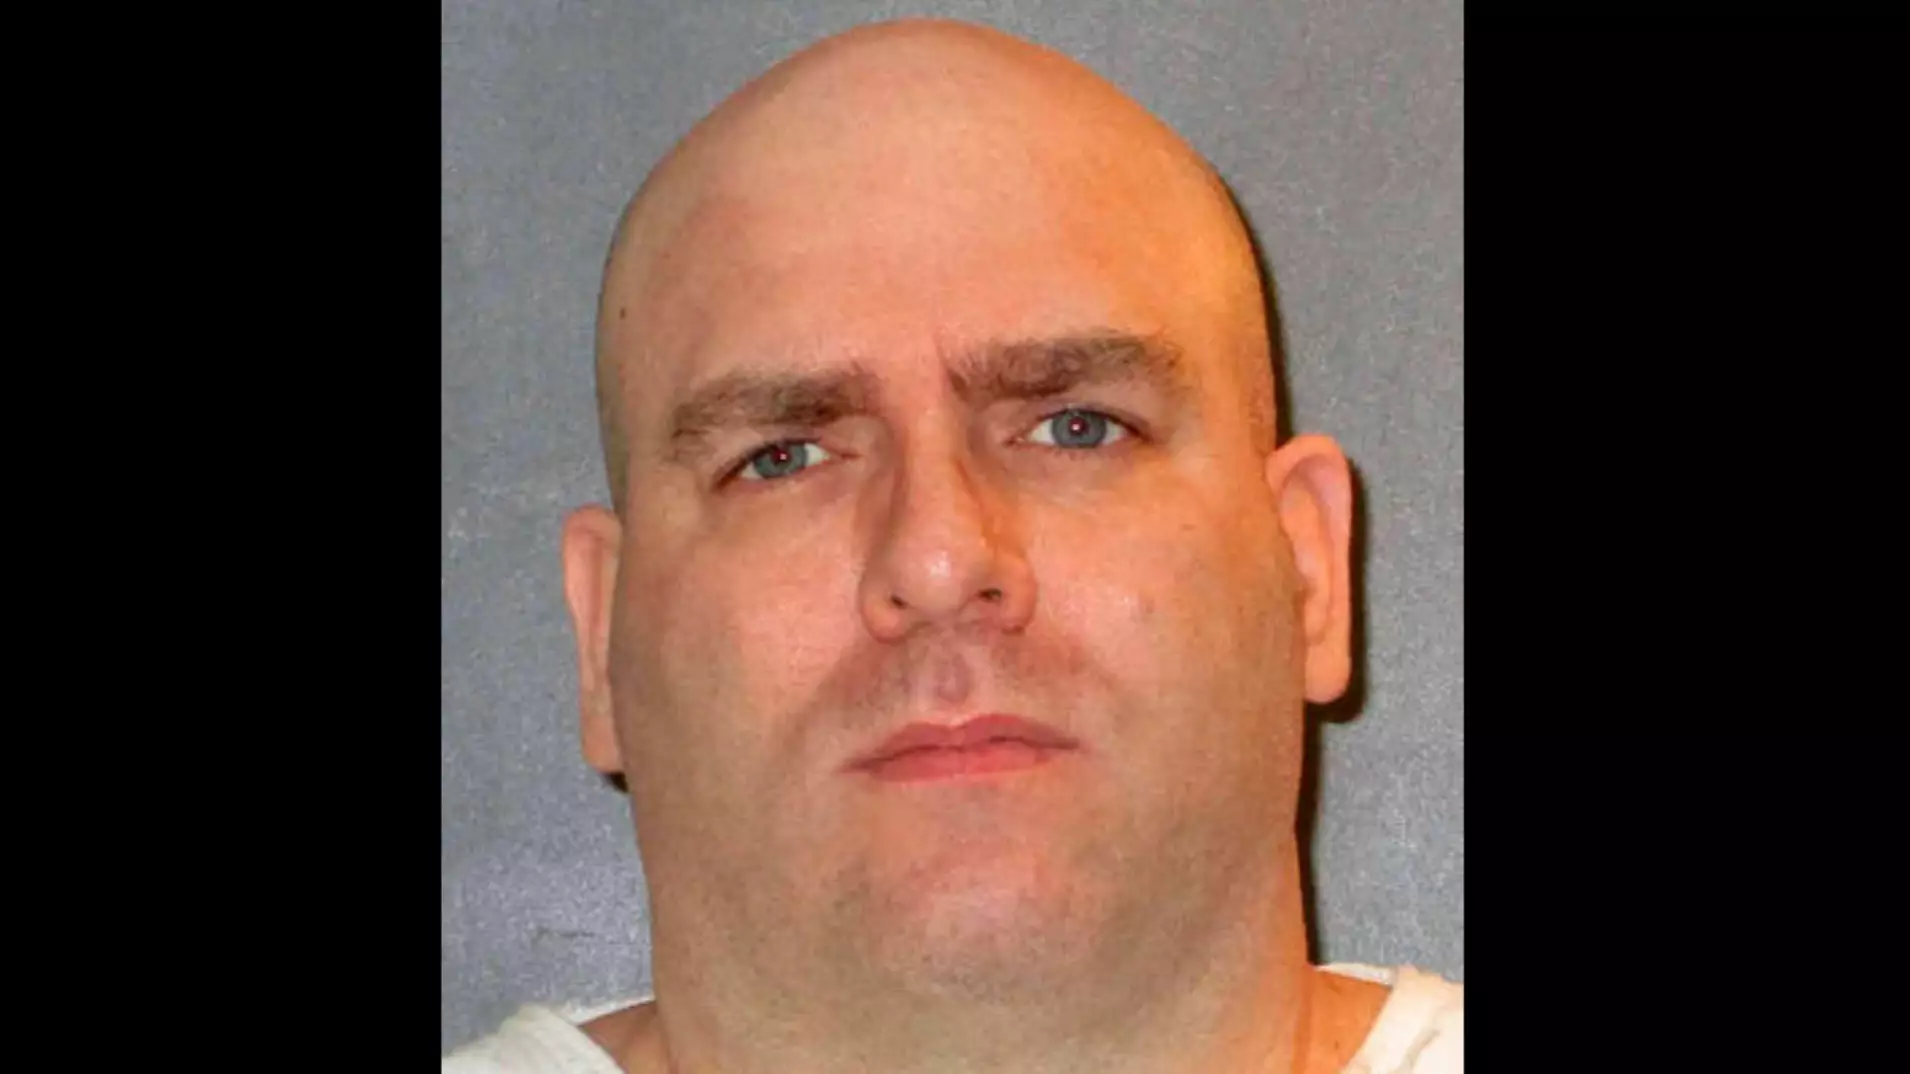 Death Row Killer Says He Feels Lethal Injection 'Burning' In Final Words